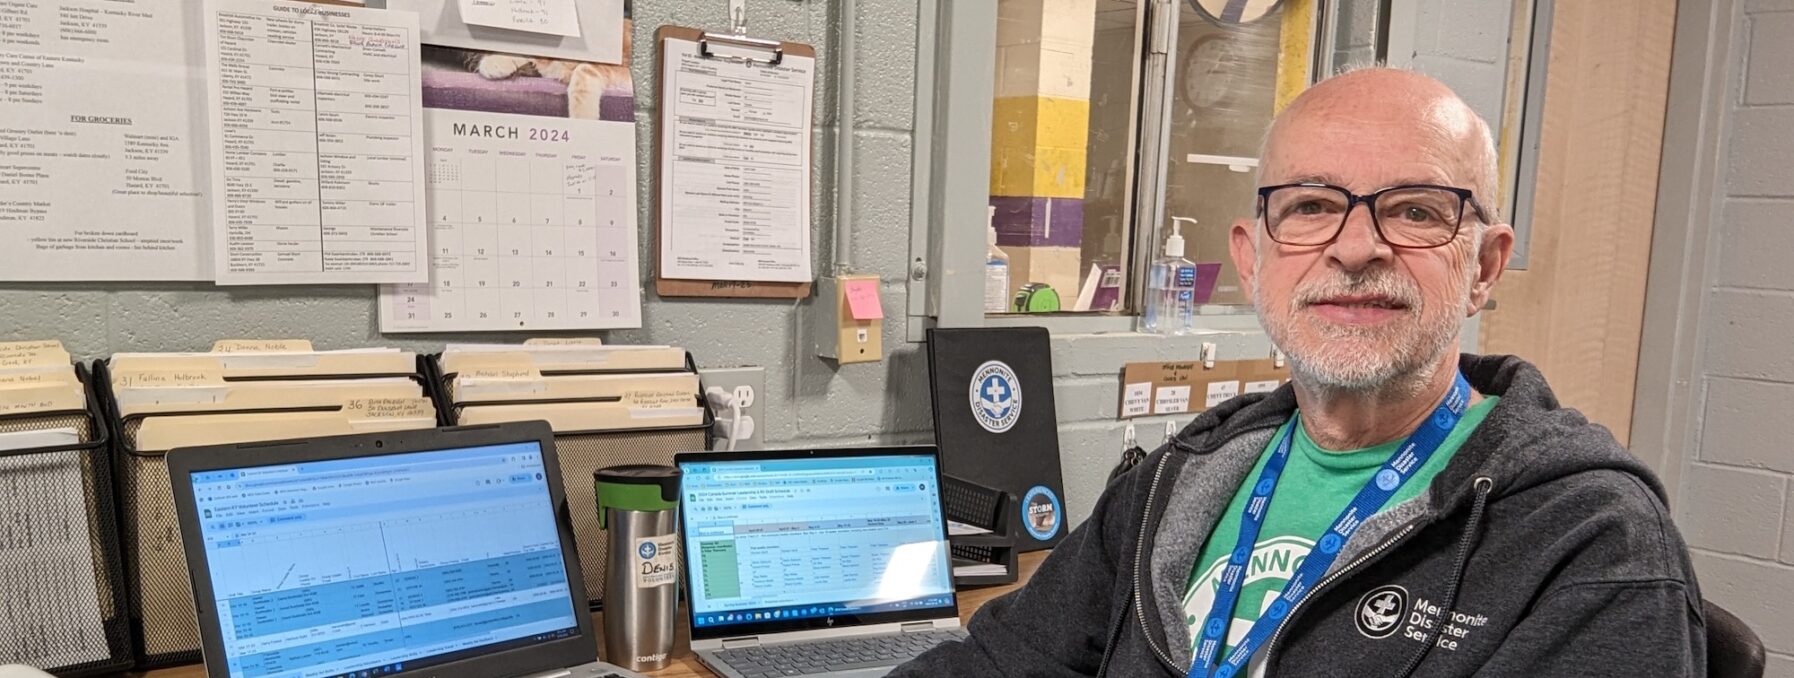 Denis Sabourin serves his 19th volunteer placement with Mennonite Disaster Service (MDS) as Office Manager for a flood response in eastern Kentucky. Photo courtesy of Denis Sabourin